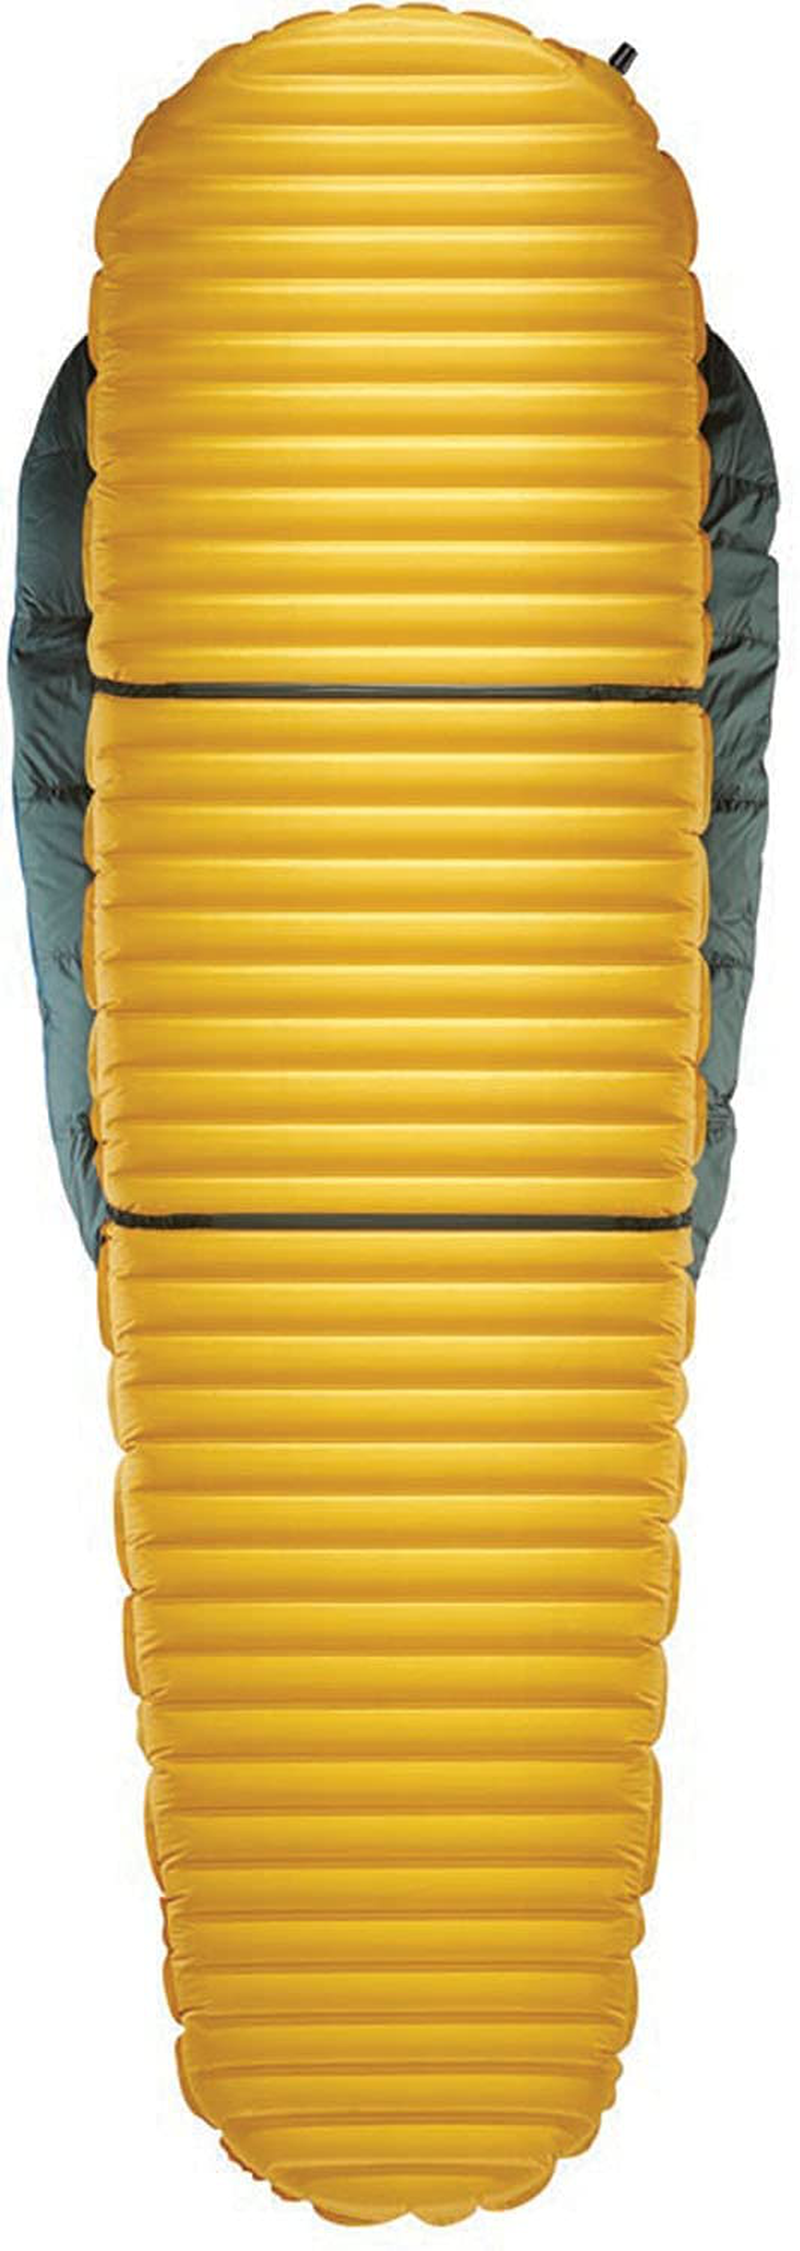 Therm-A-Rest Hyperion 32-Degree Ultralight down Mummy Sleeping Bag Sporting Goods > Outdoor Recreation > Camping & Hiking > Sleeping Bags Therm-a-Rest   